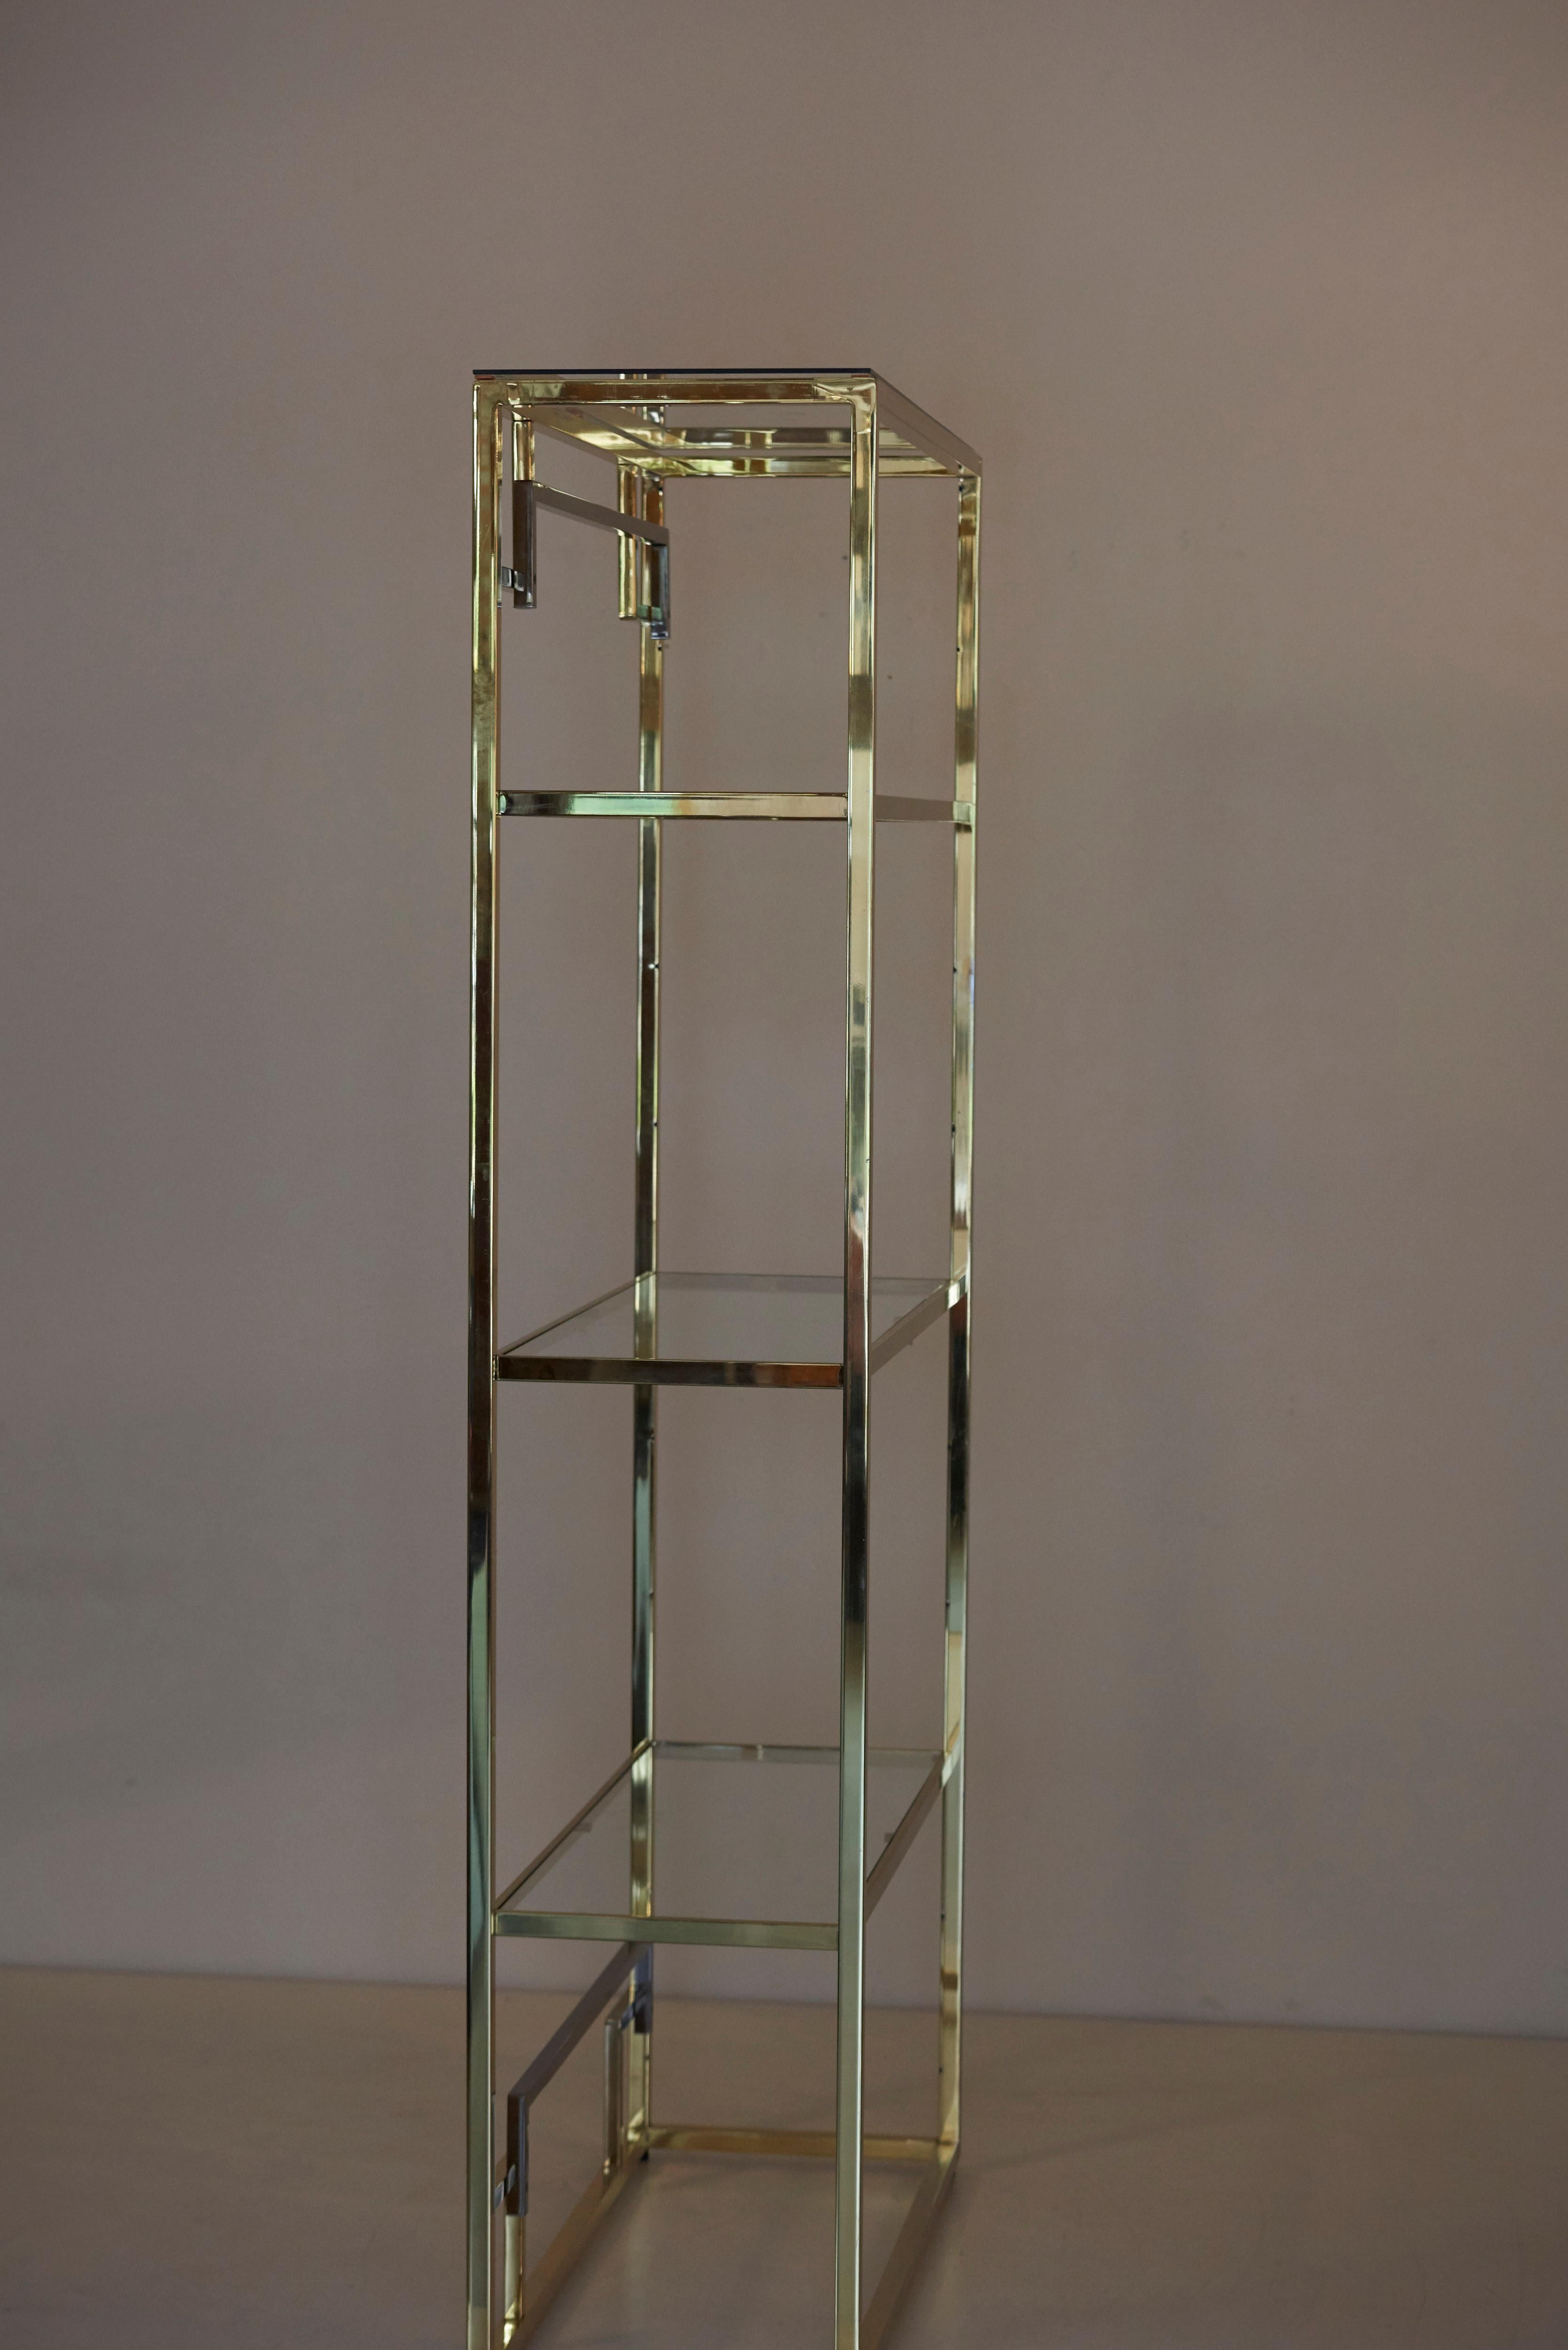 1 of 2 Brass and Gold-Plated Bookshelf or Étagère Attributed to Maison Jansen 1